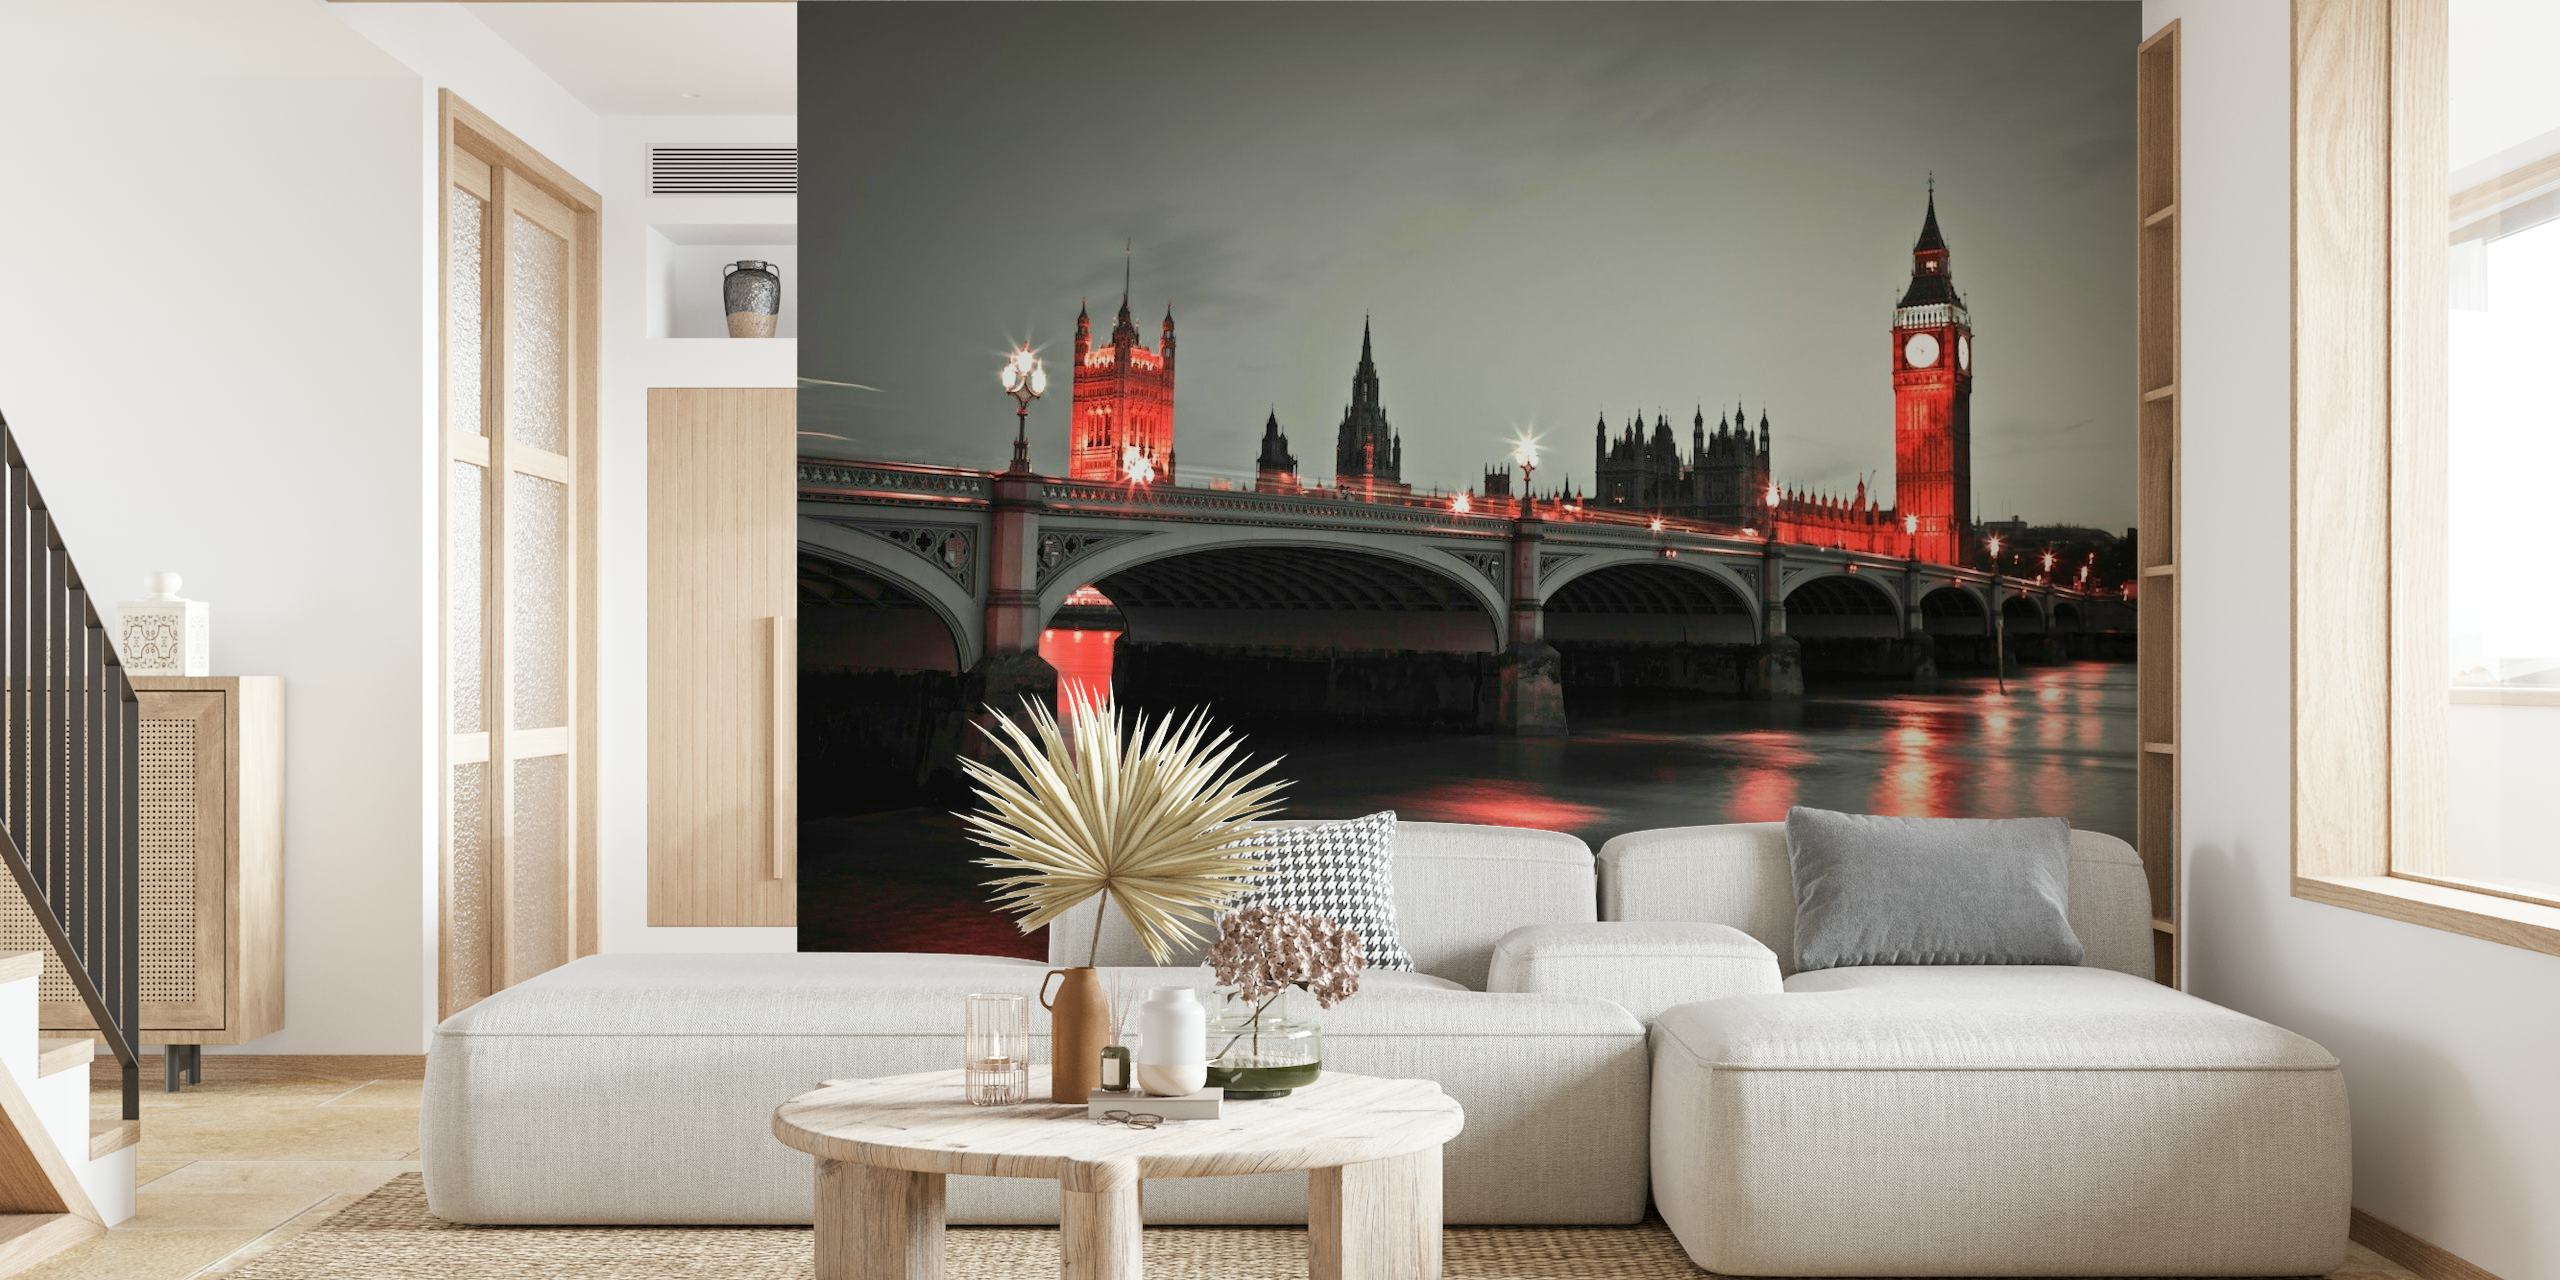 Night Magic cityscape wall mural with a highlighted iconic clock tower